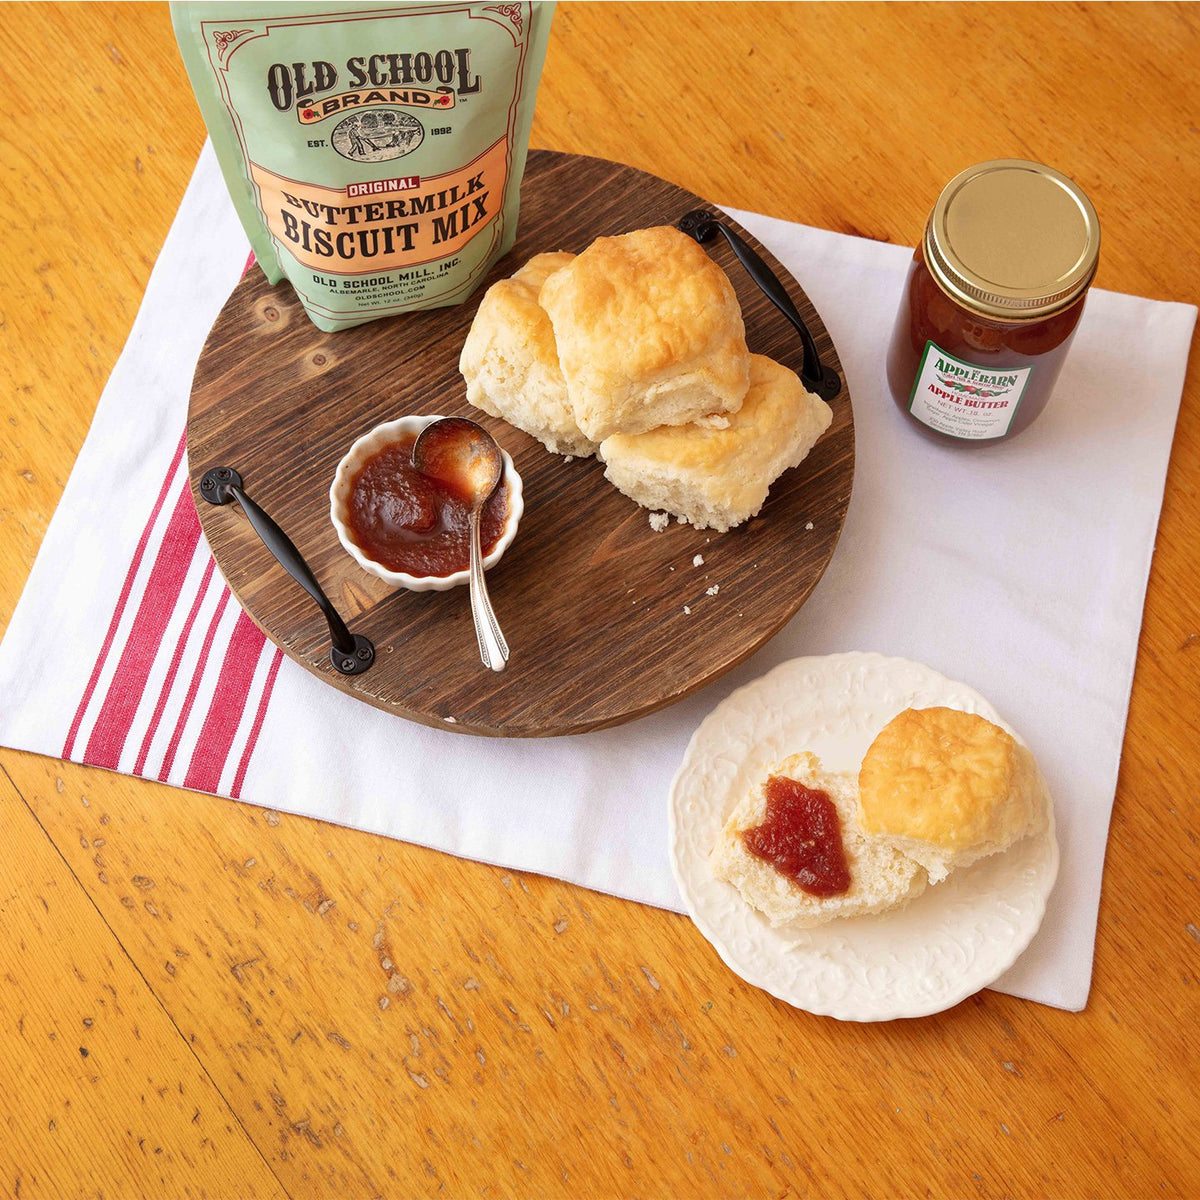 Apple butter on a biscuit